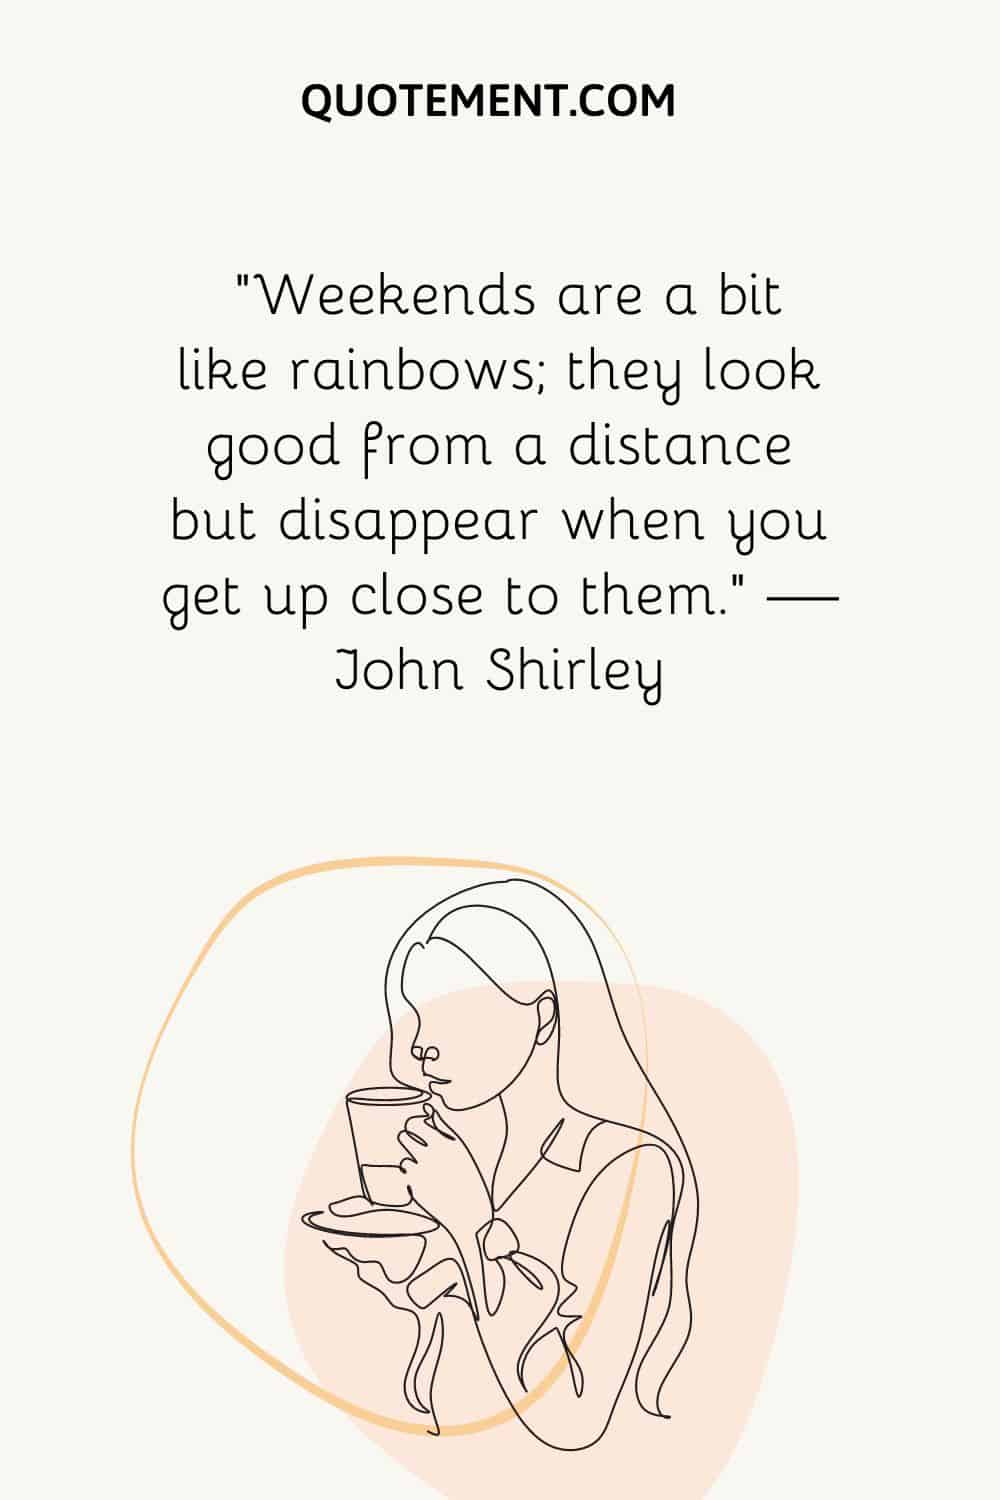 girl holding a cup illustration representing happy weekend quote